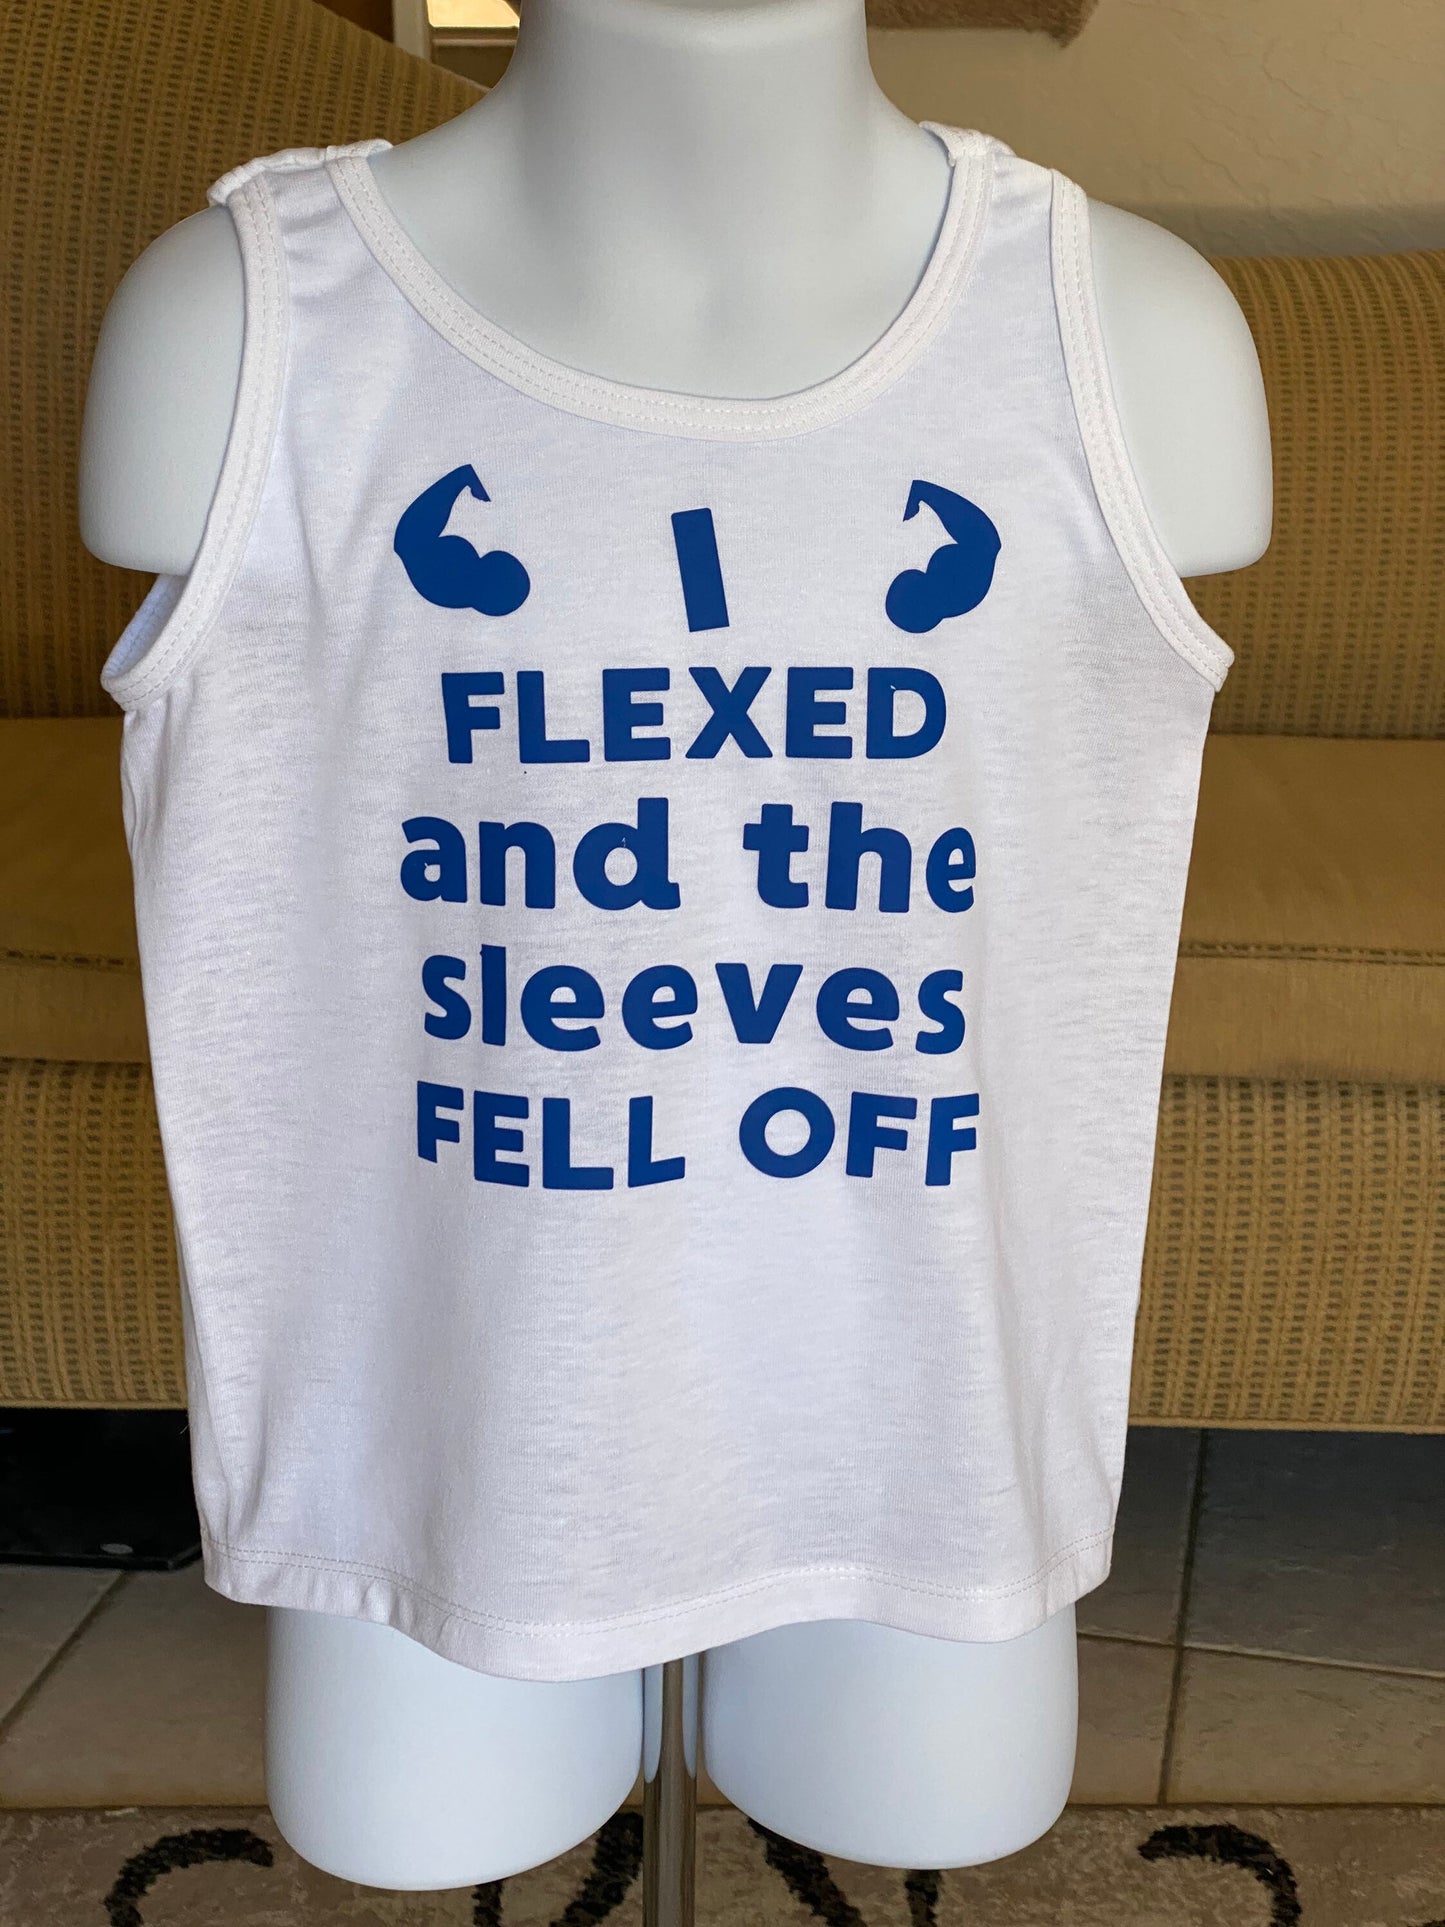 I Flexed and the sleeves fell off / funny kids shirt/funny gym /funny muscle shirt/funny workout shirt/funny toddler shirt Christmas gift